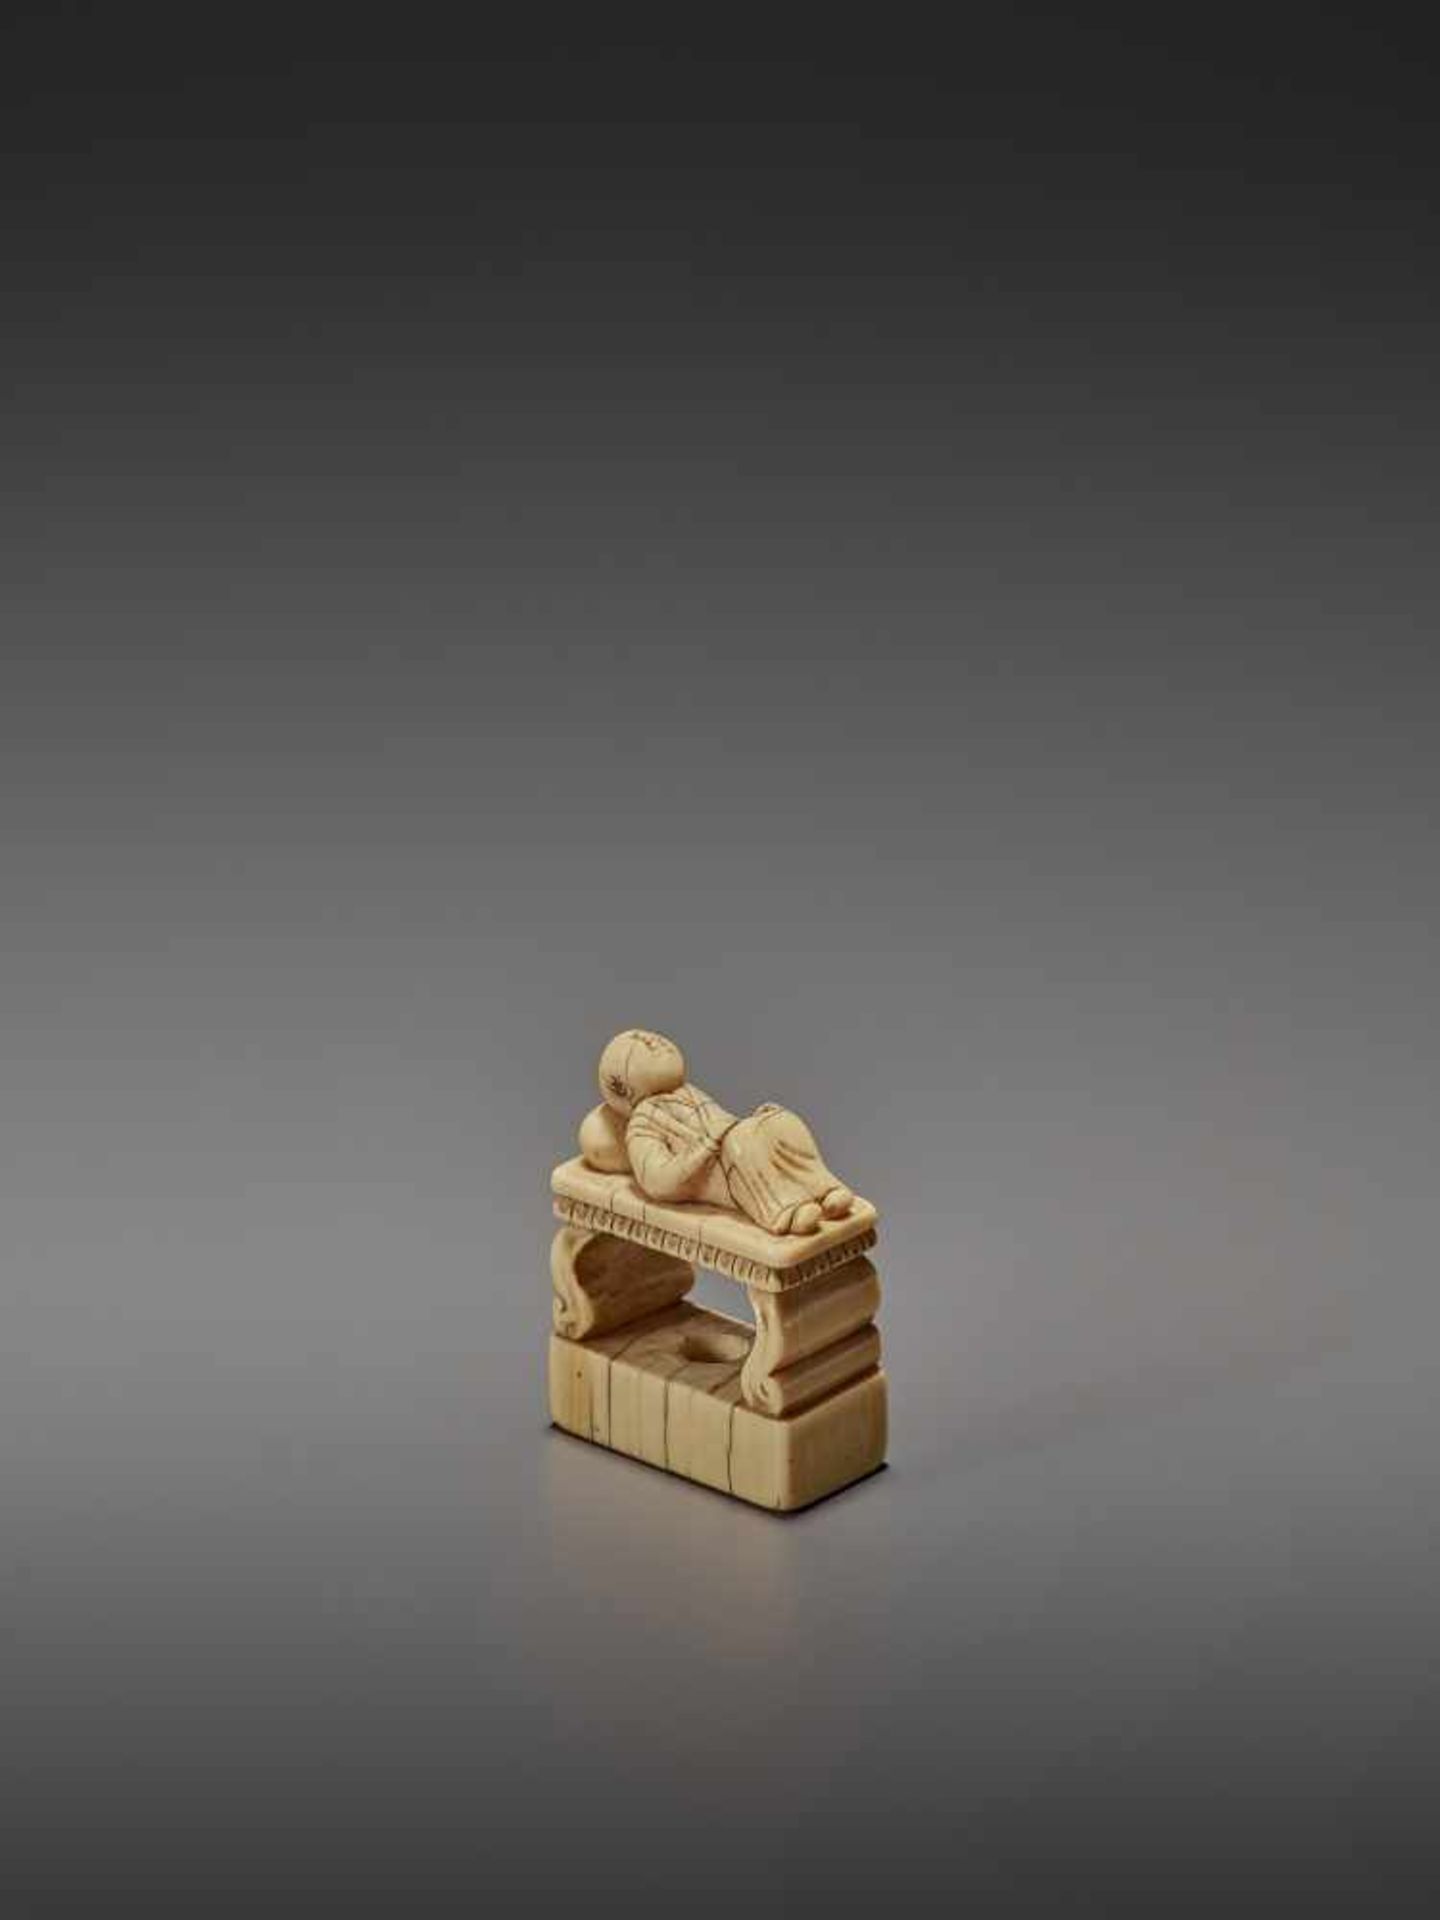 AN EARLY IVORY NETSUKE OF A CHINESE MAN SLEEPING ON AN OPIUM BED UnsignedJapan, early 18th - Bild 3 aus 11